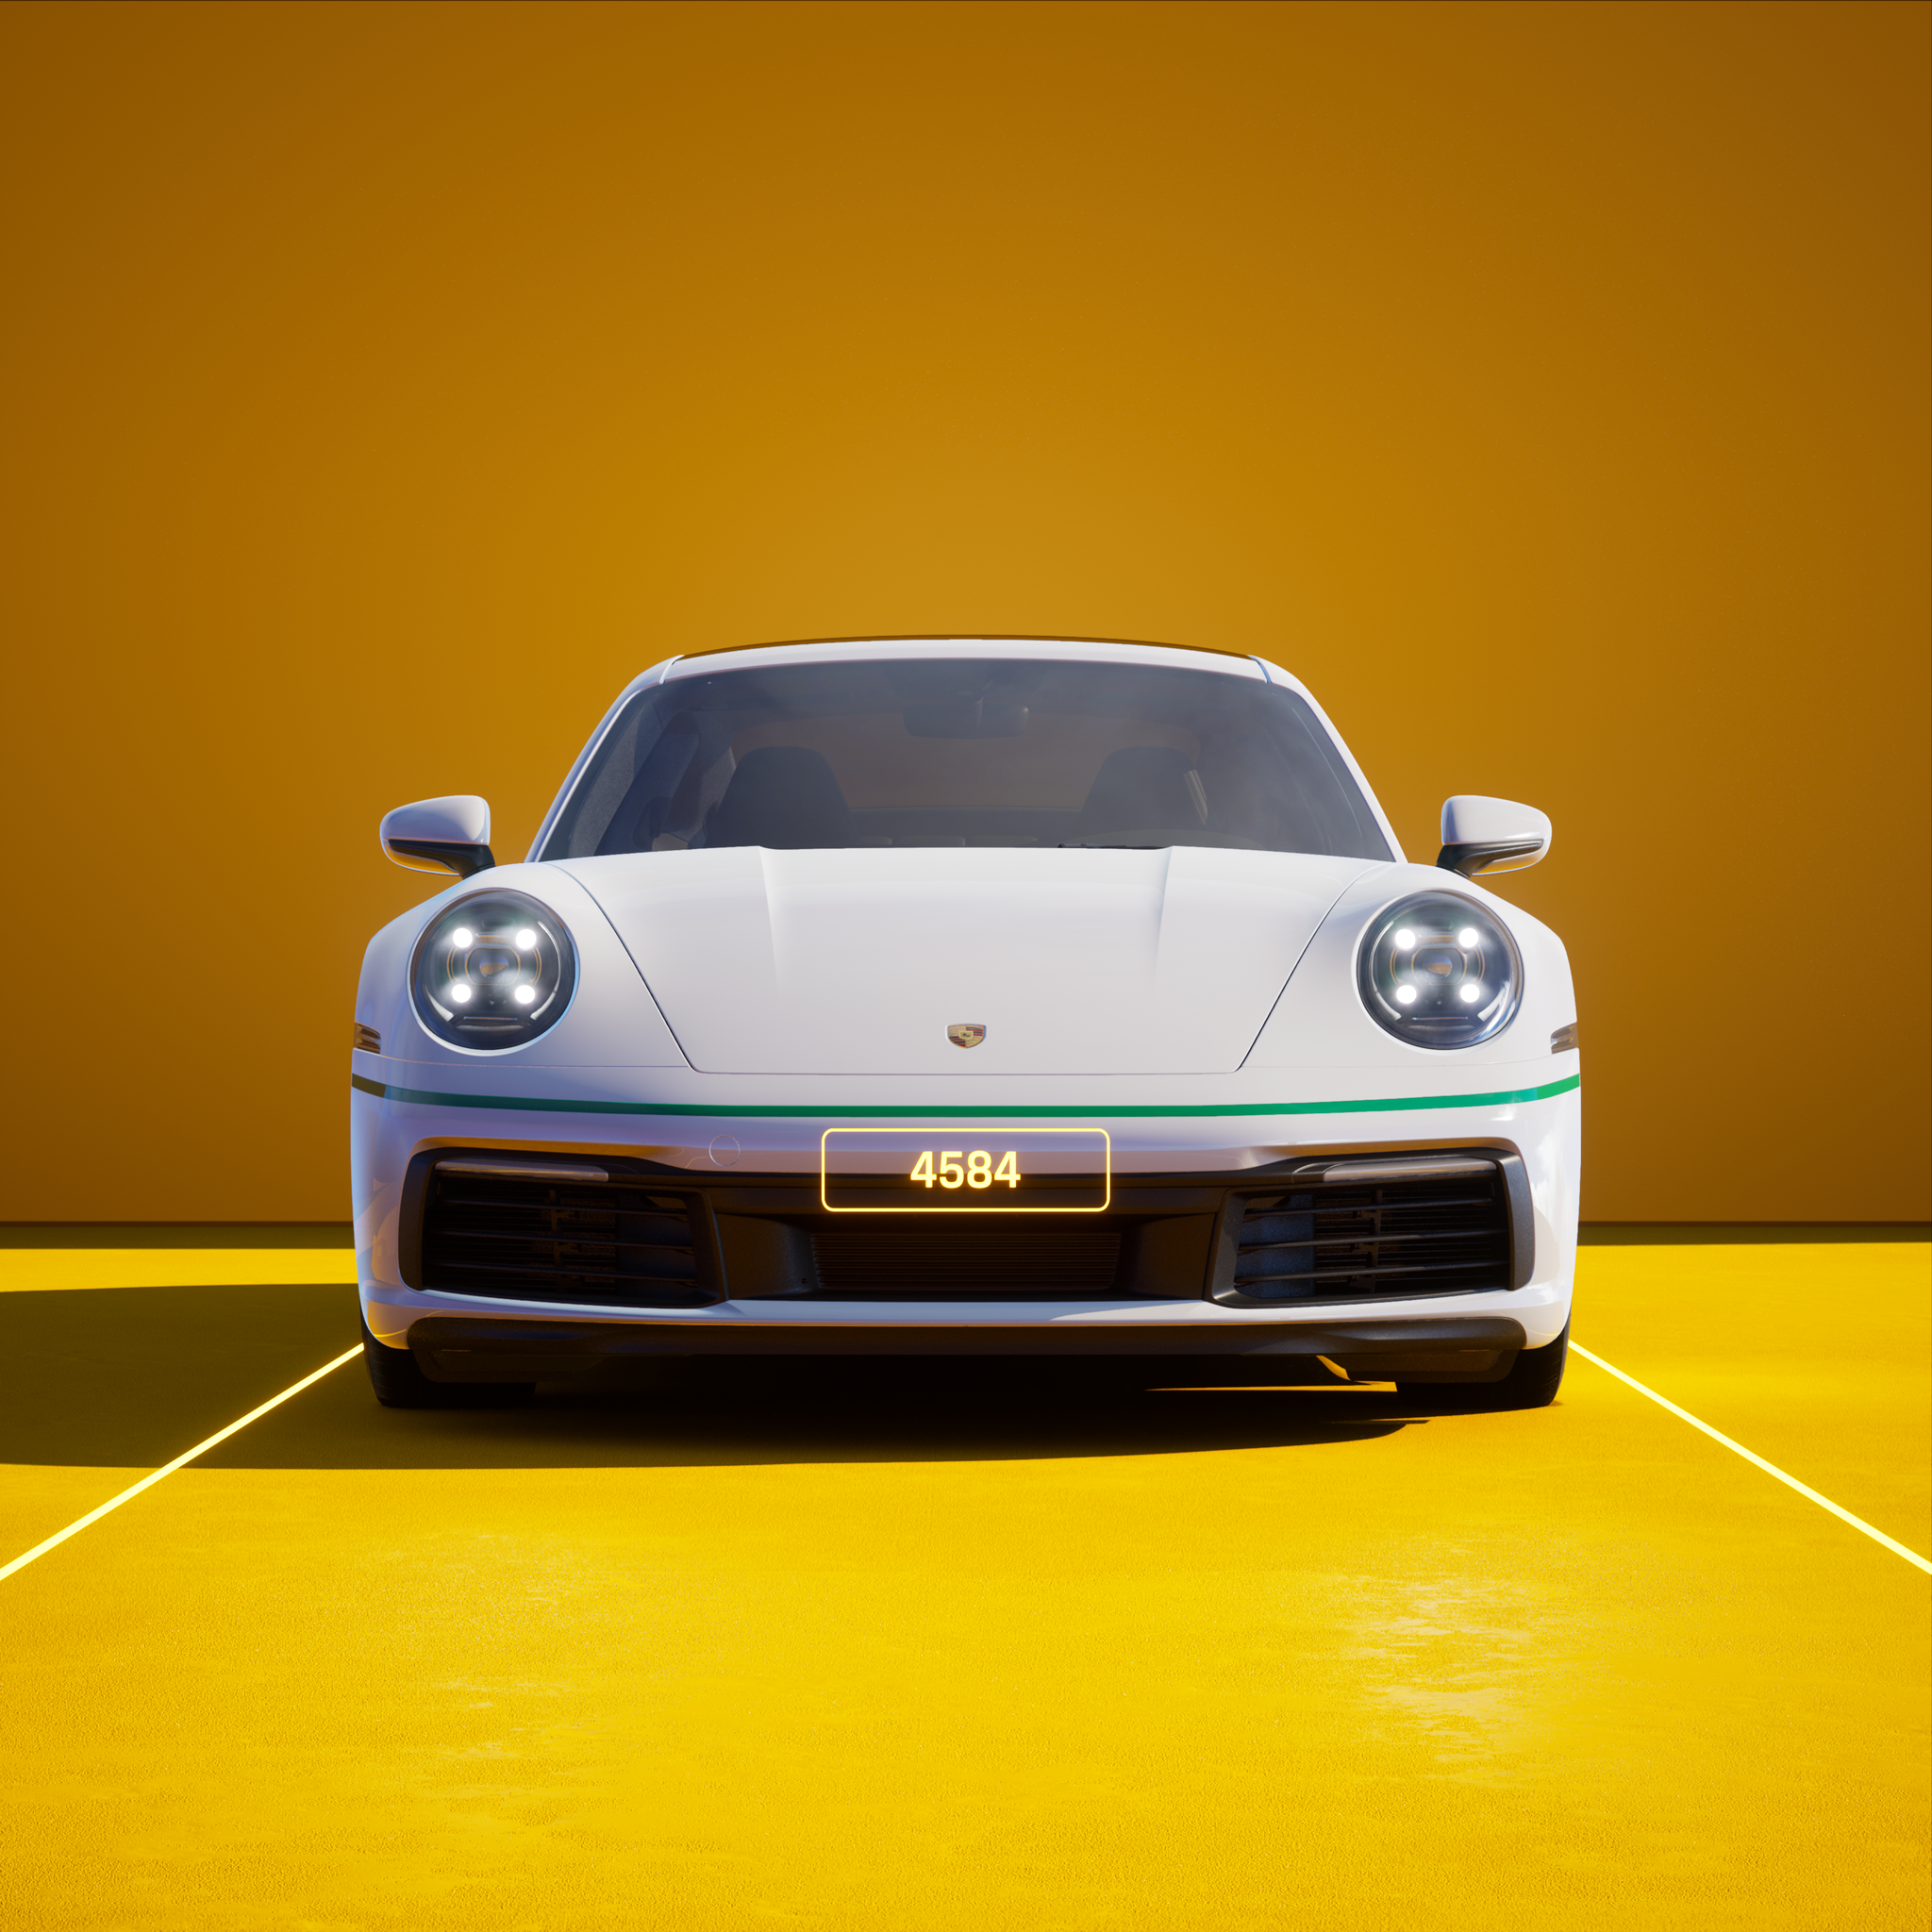 The PORSCHΞ 911 4584 image in phase